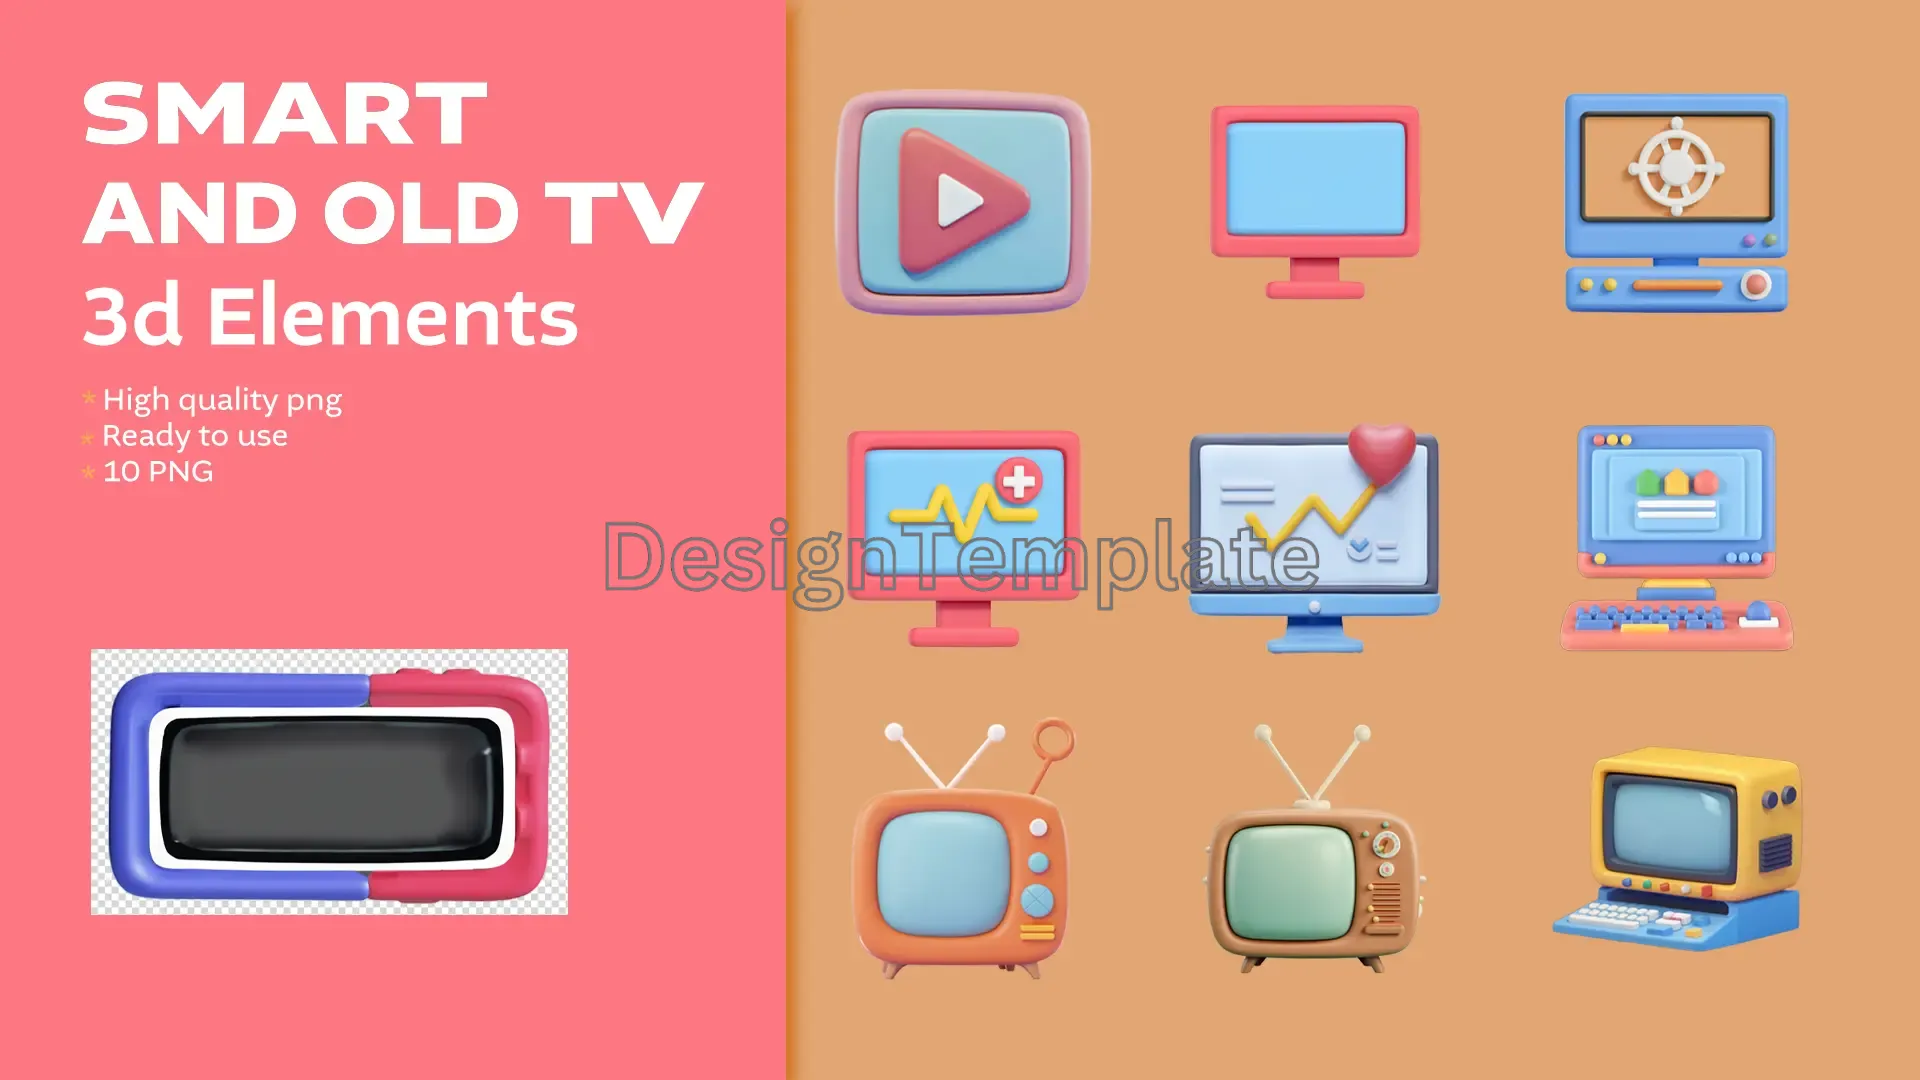 Retro and Tech 3D Television Elements Collection image